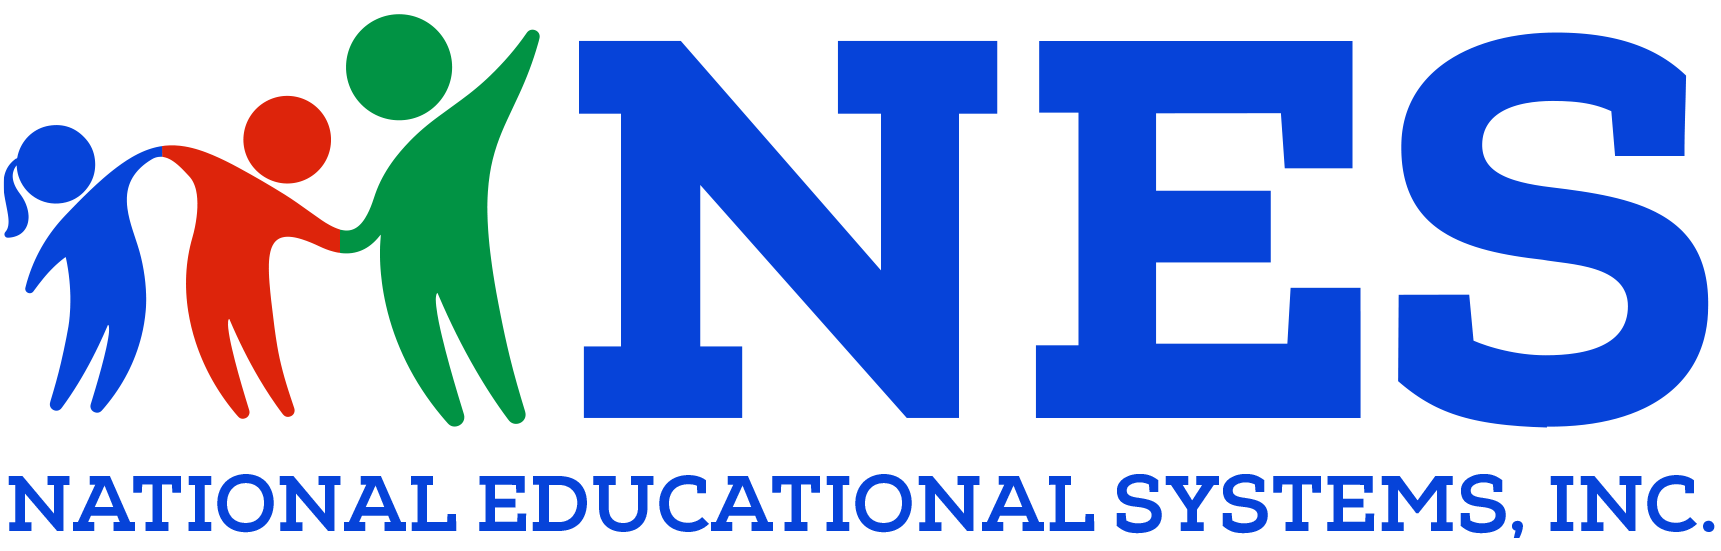 National Educational Systems logo